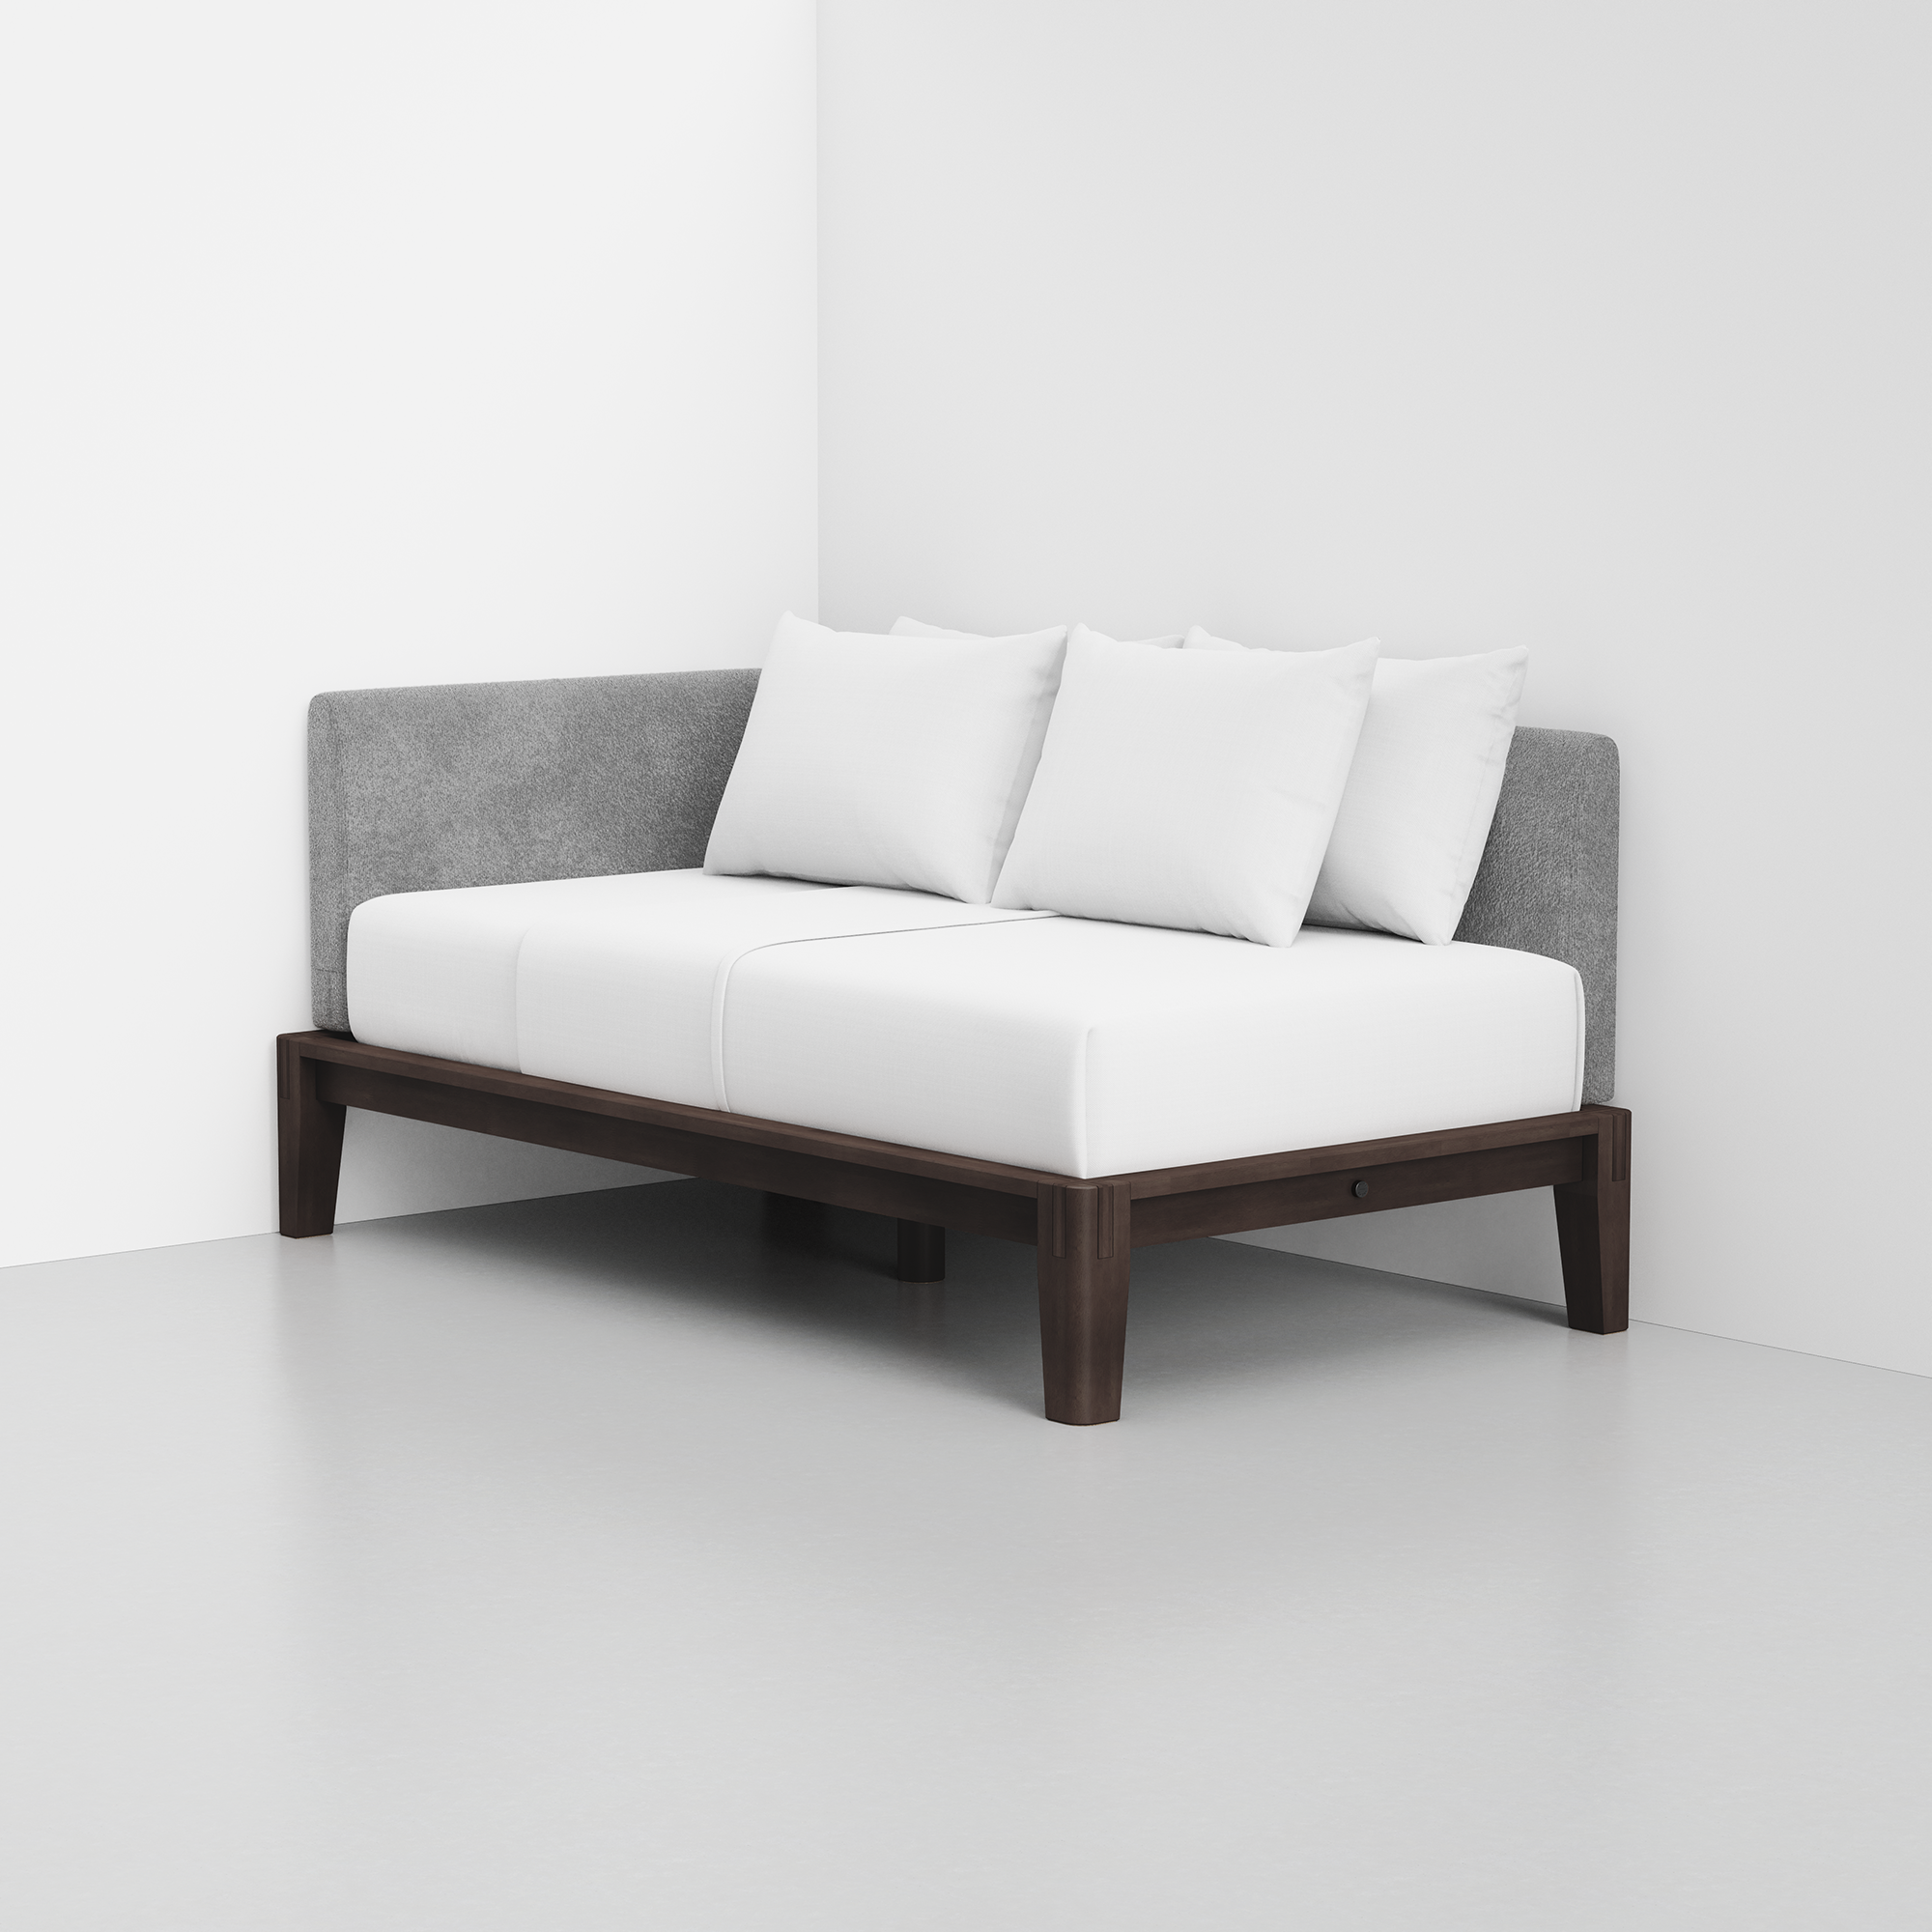 PDP Image: The Daybed (Espresso / Pewter) - Rendering - Pillows Stacked